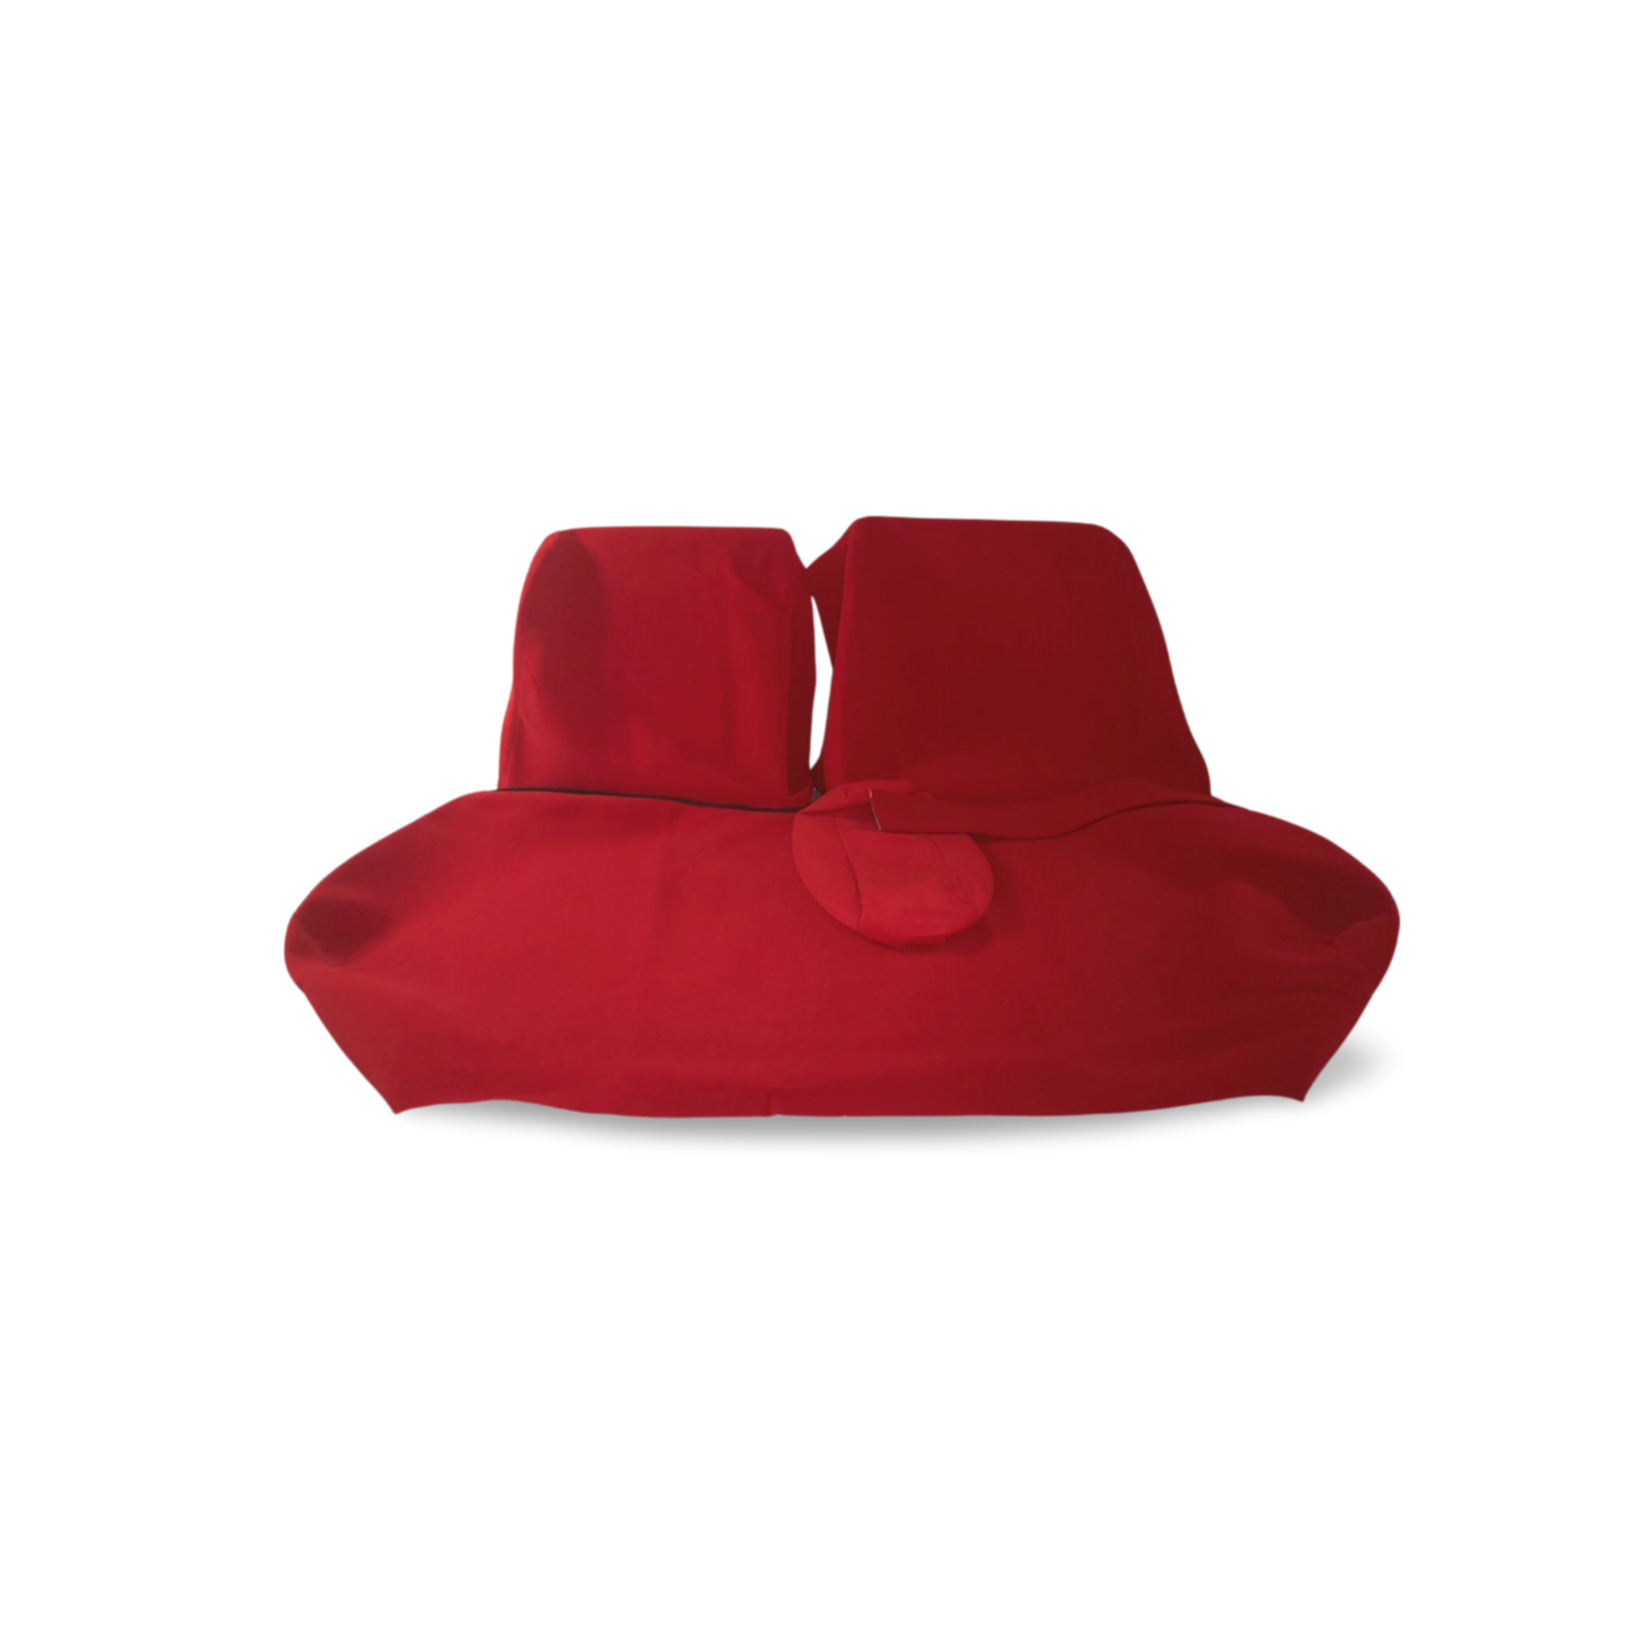 Hoesset Jersey rood 16/73 (met achterbank armsteun 20cm) non Pallas 09/62-07/69 Nr Org: Interior - Image 16/73